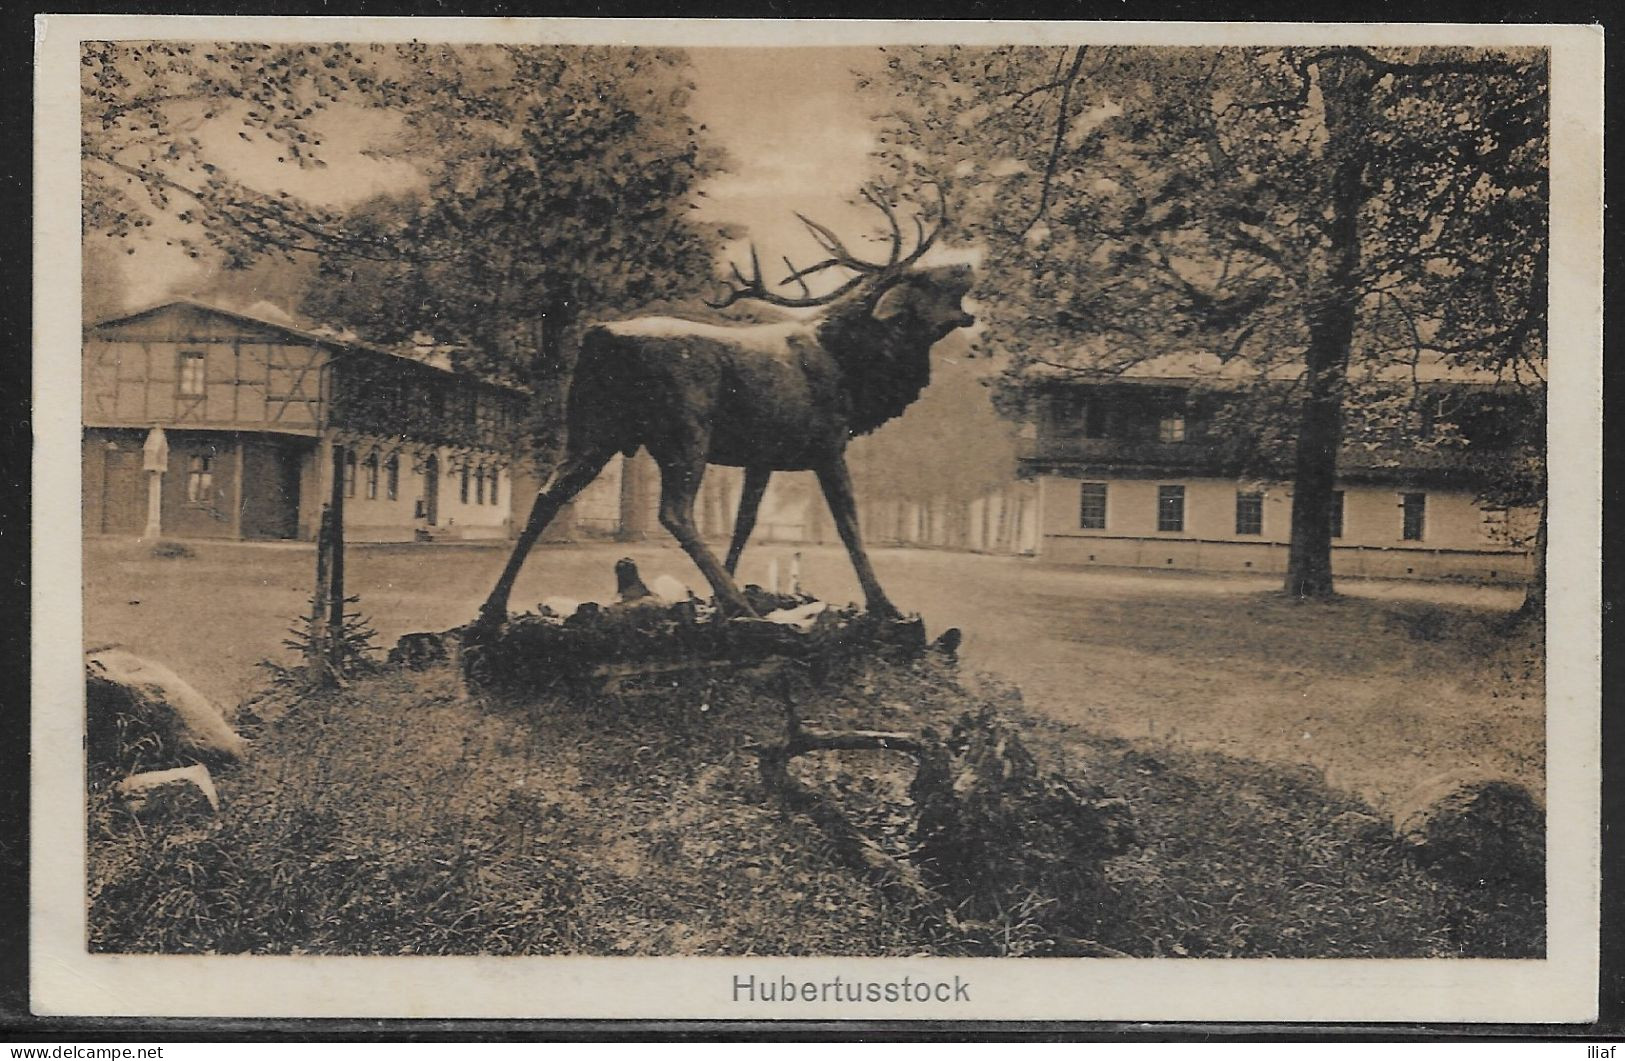 Germany. Hubertusstock. Illustrated View Posted Postcard - Joachimsthal